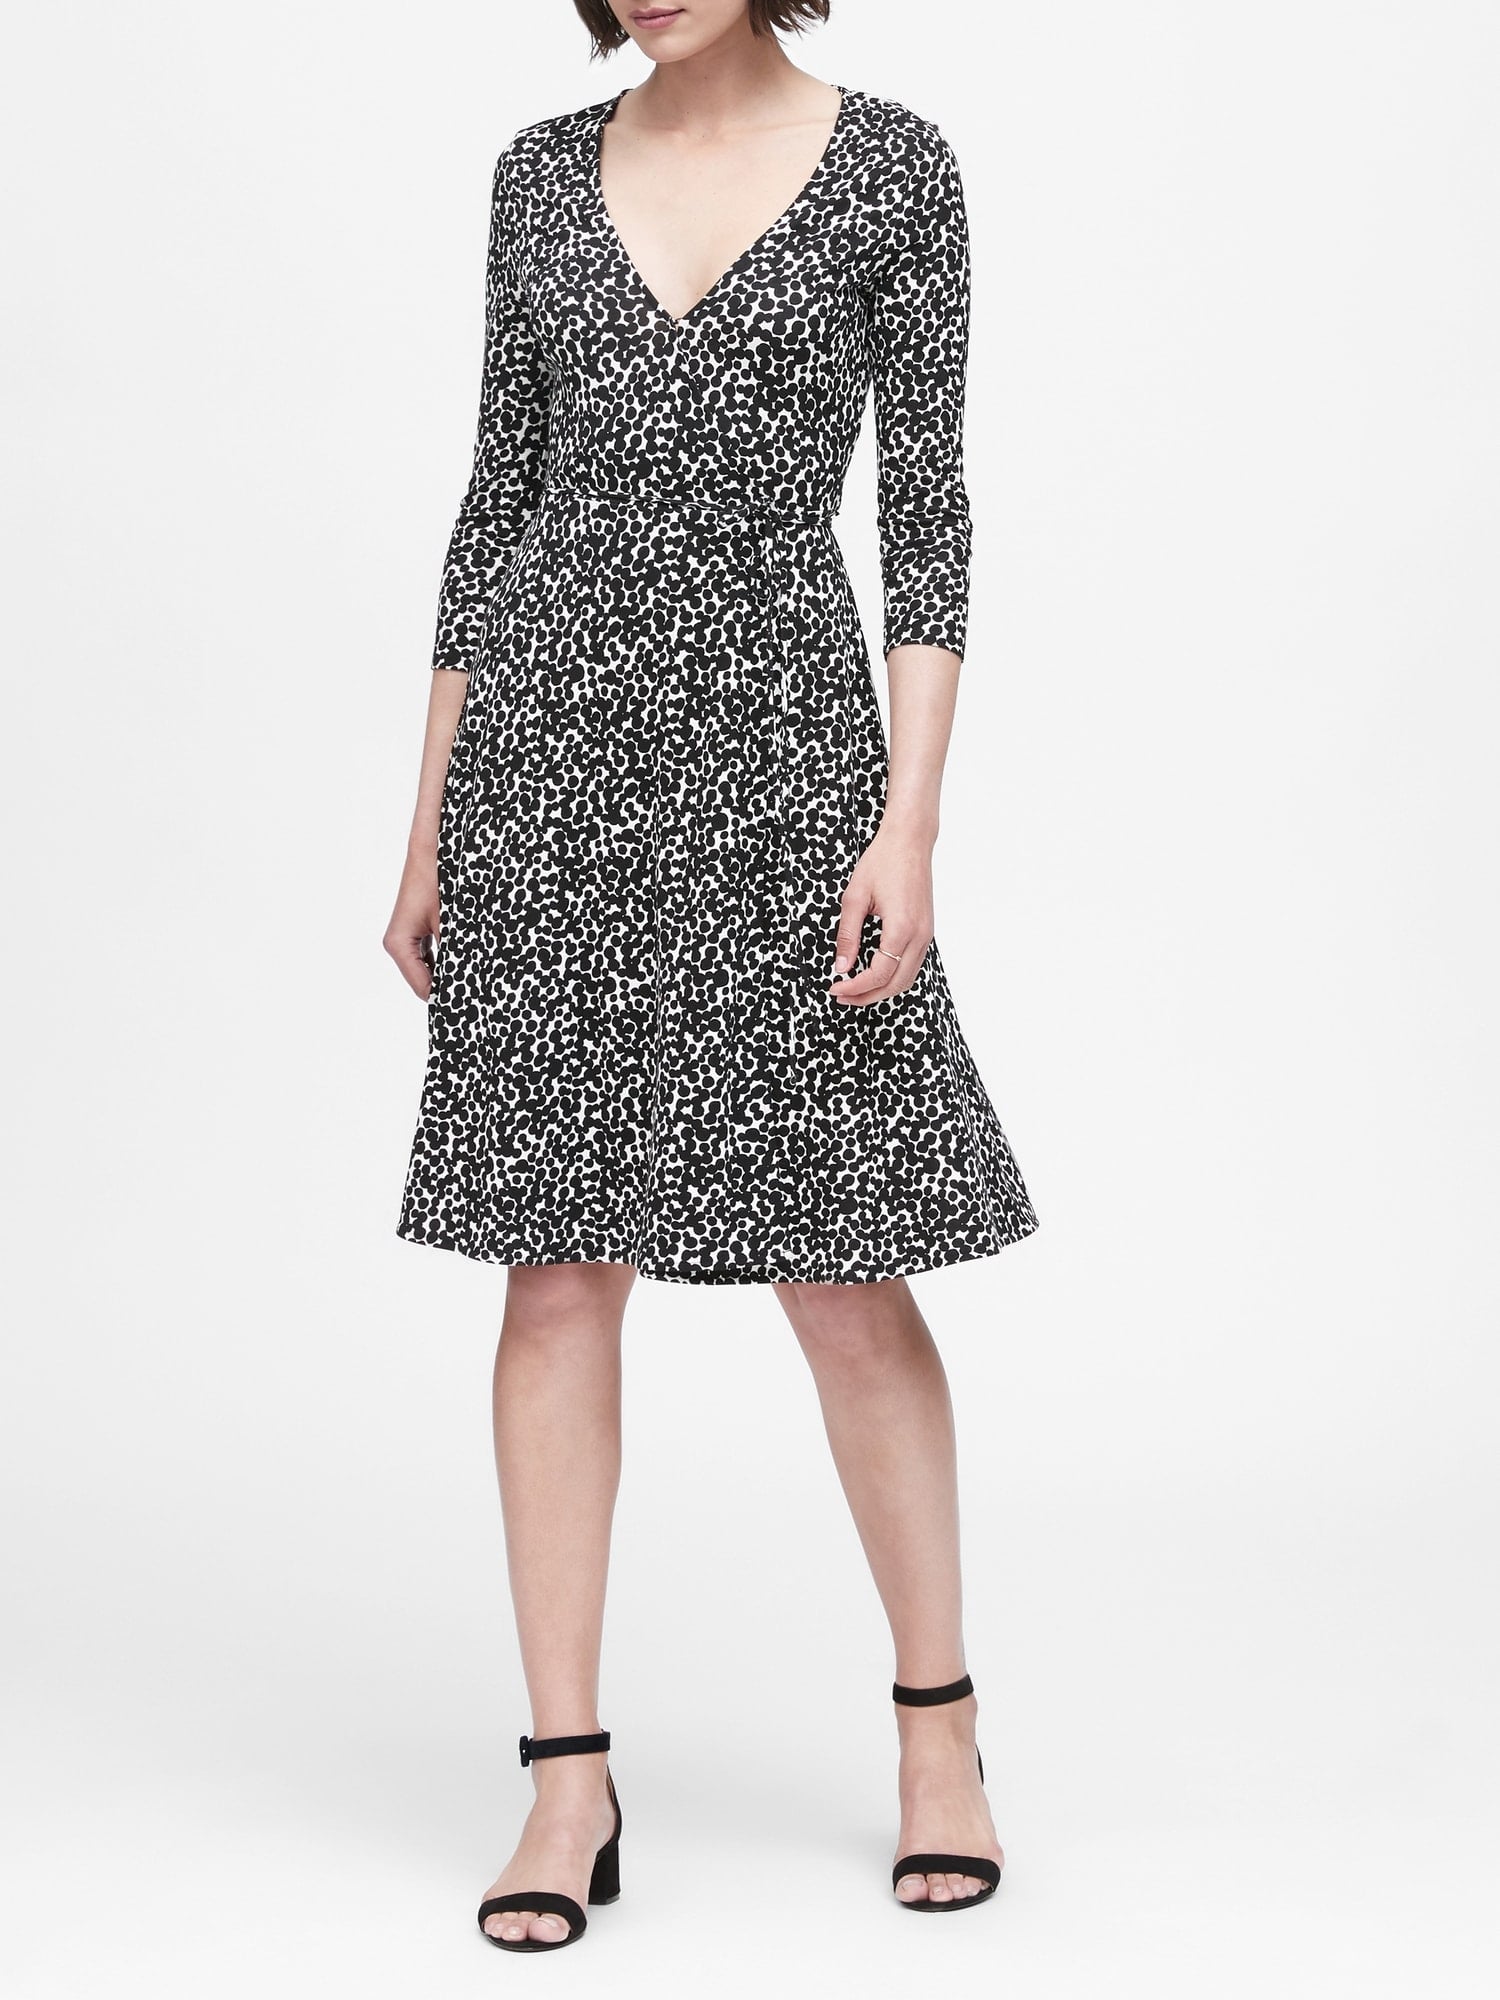 Banana Republic Printed Soft Ponte Wrap Dress | Going Into the Office? You  Need a Great Work Dress | POPSUGAR Fashion Photo 15